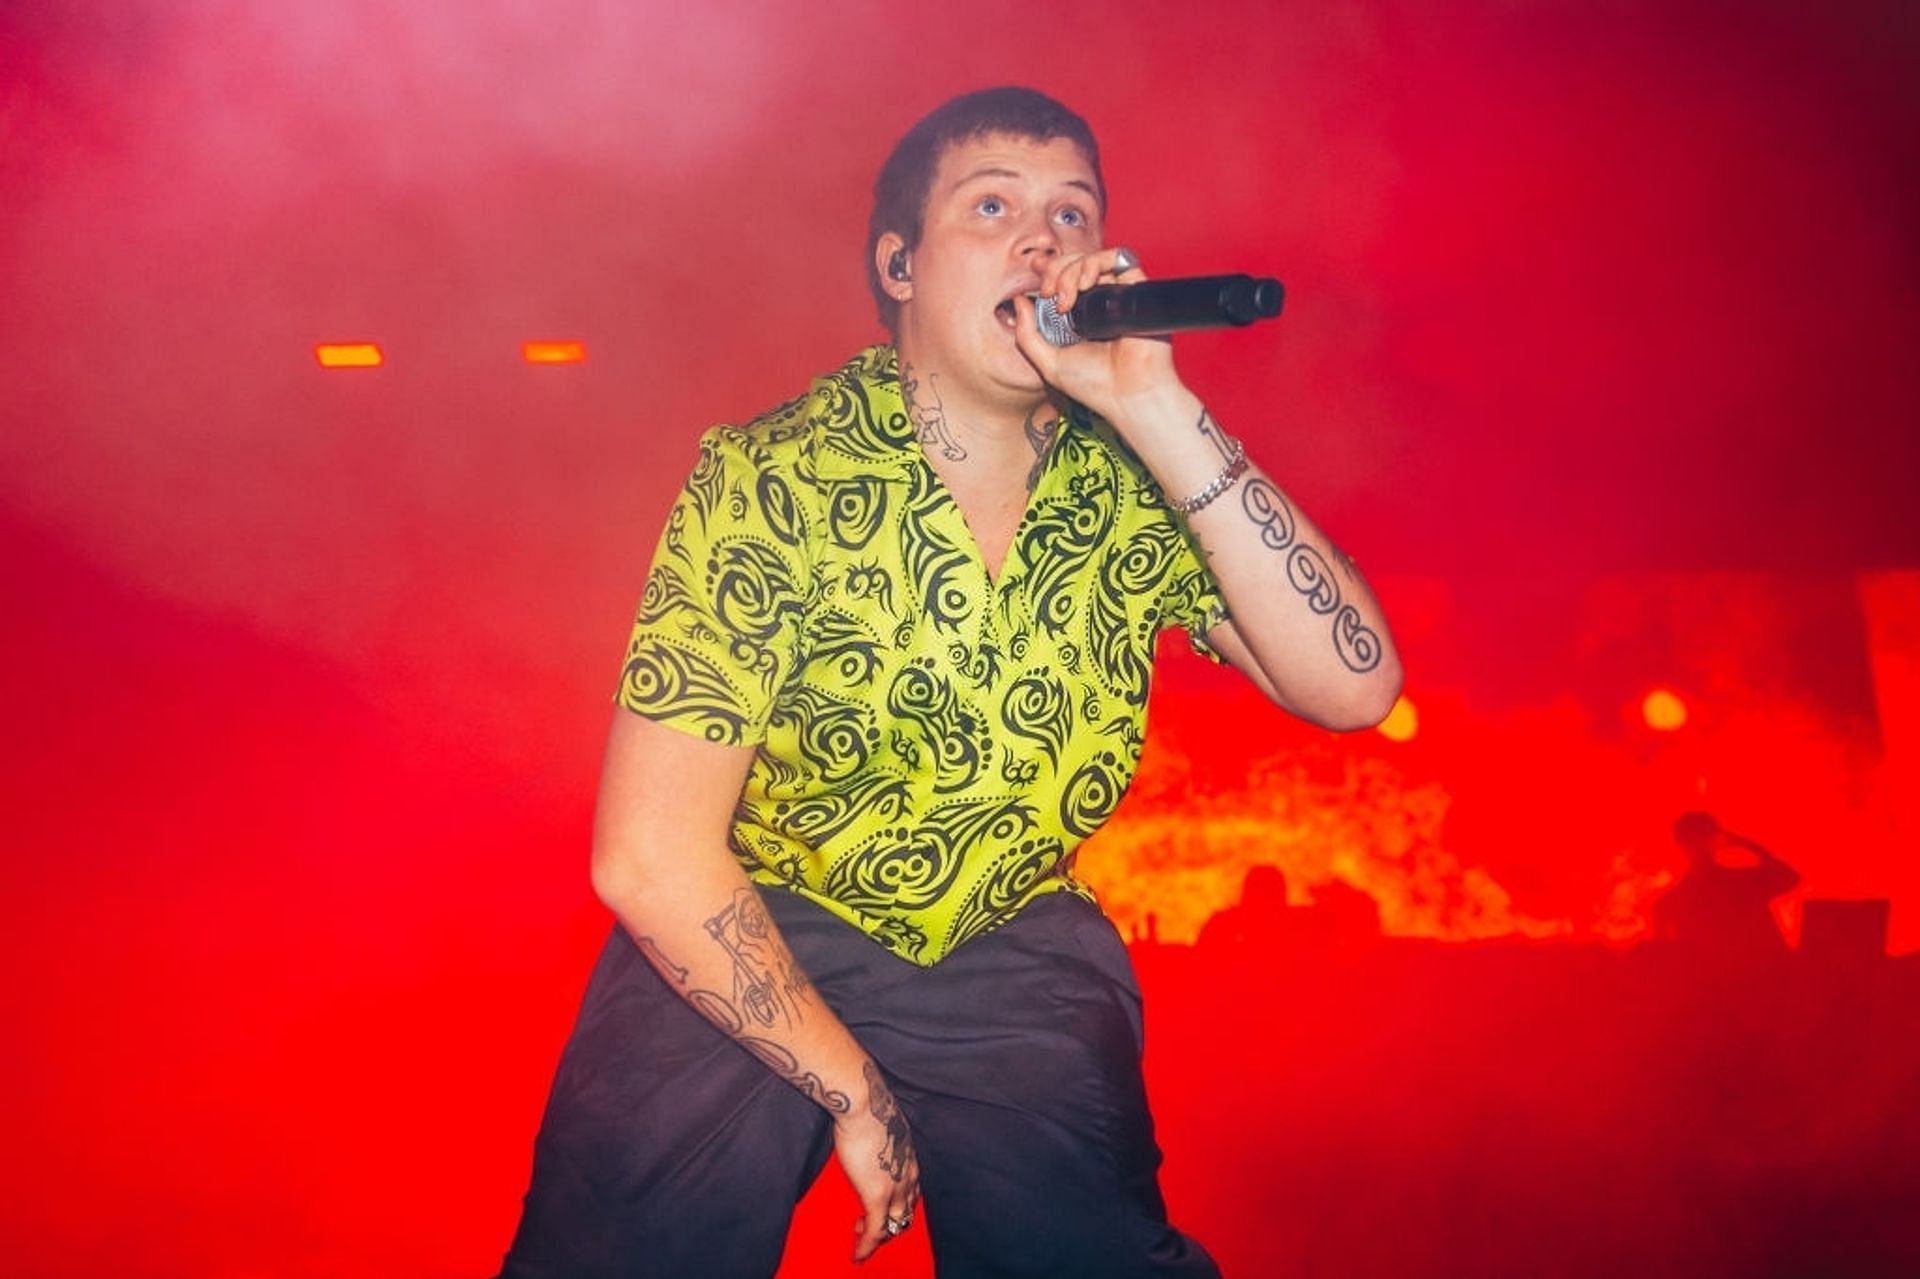 Yung Lean was seen at Donda 2&#039;s listening party (Image via Joseph Okpako/Getty Images)